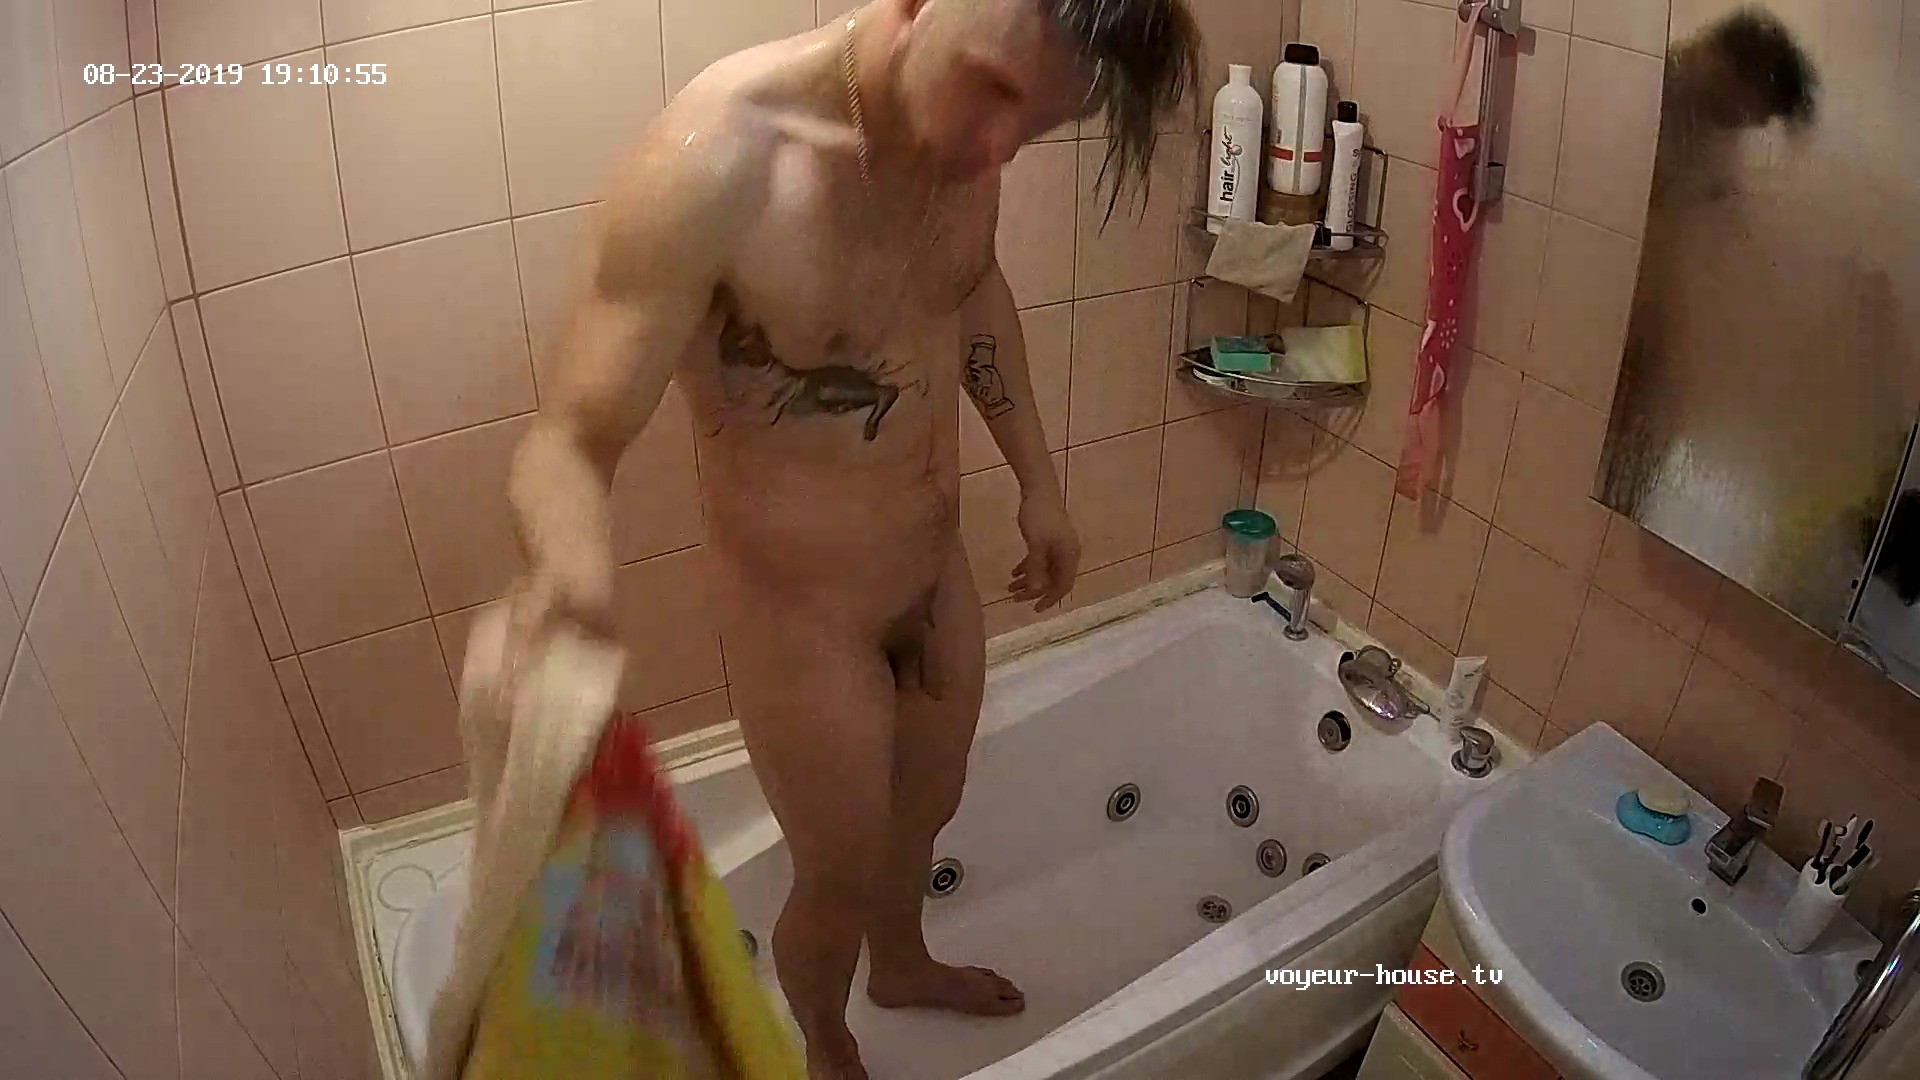 Guest Guy Evening Shower 23 Aug 2019